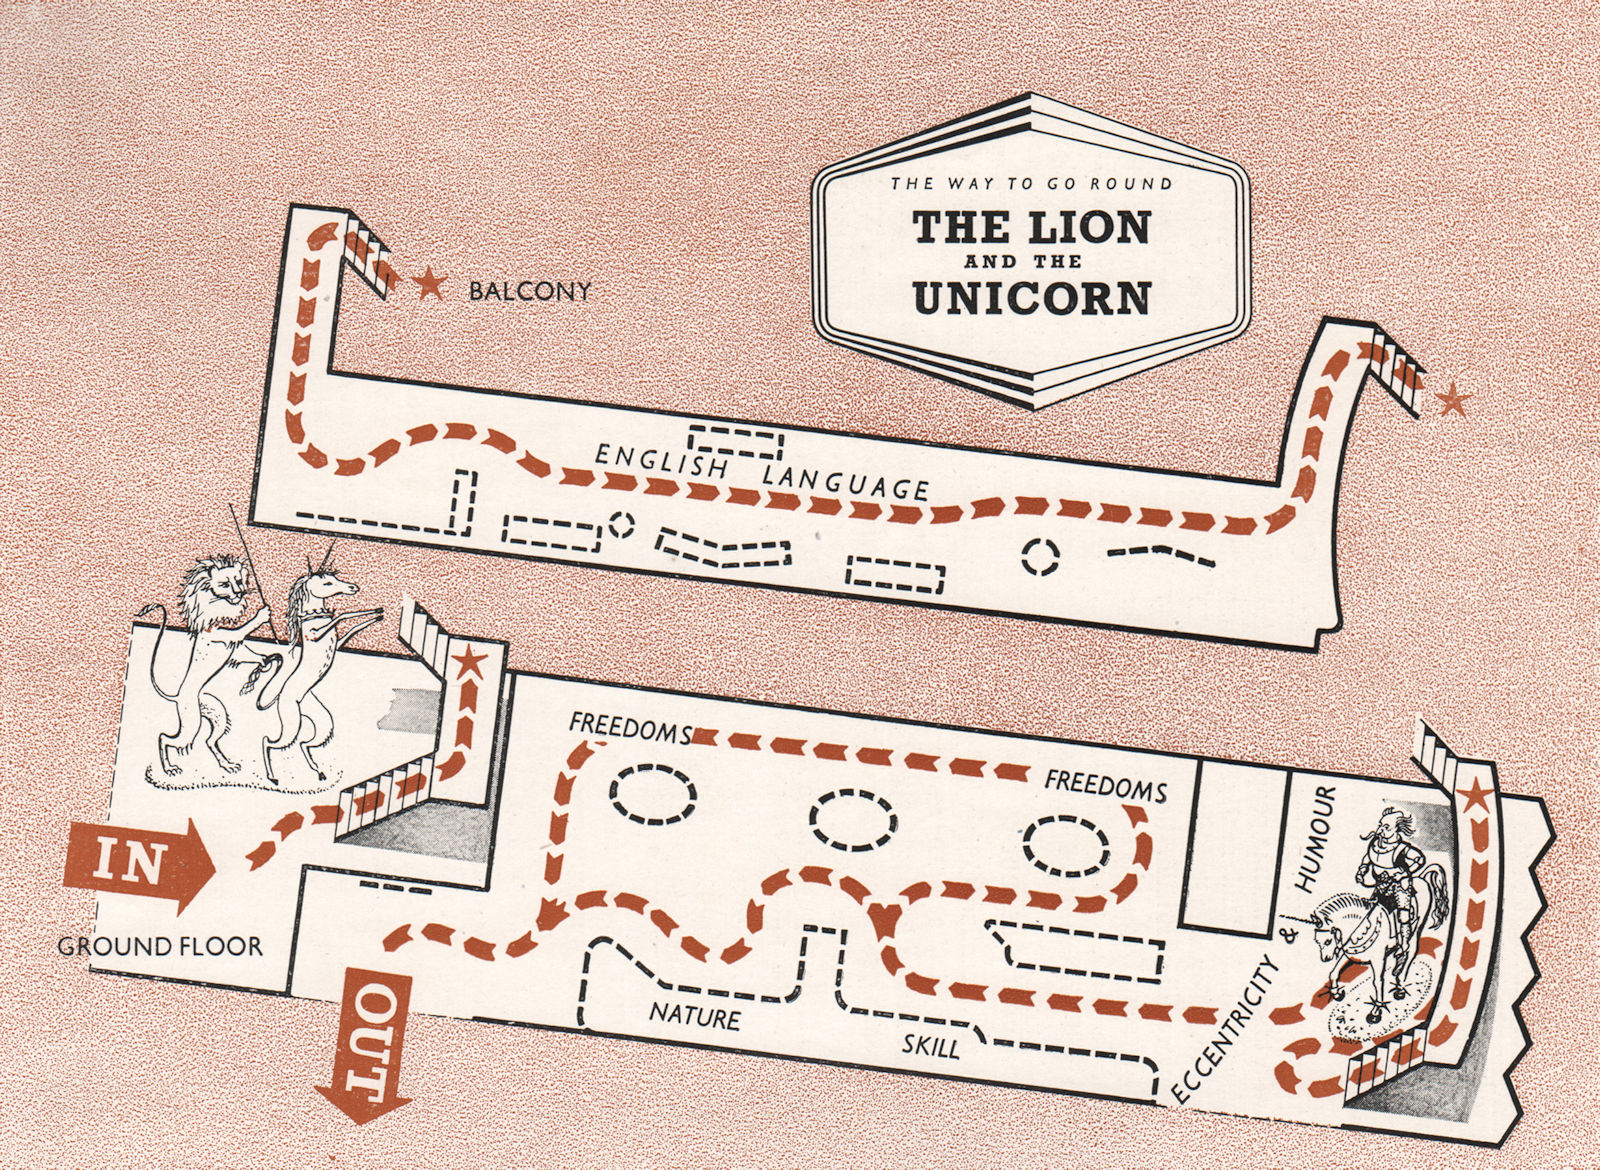 Associate Product FESTIVAL OF BRITAIN. The Lion and the Unicorn exhibit. Tour plan 1951 old map